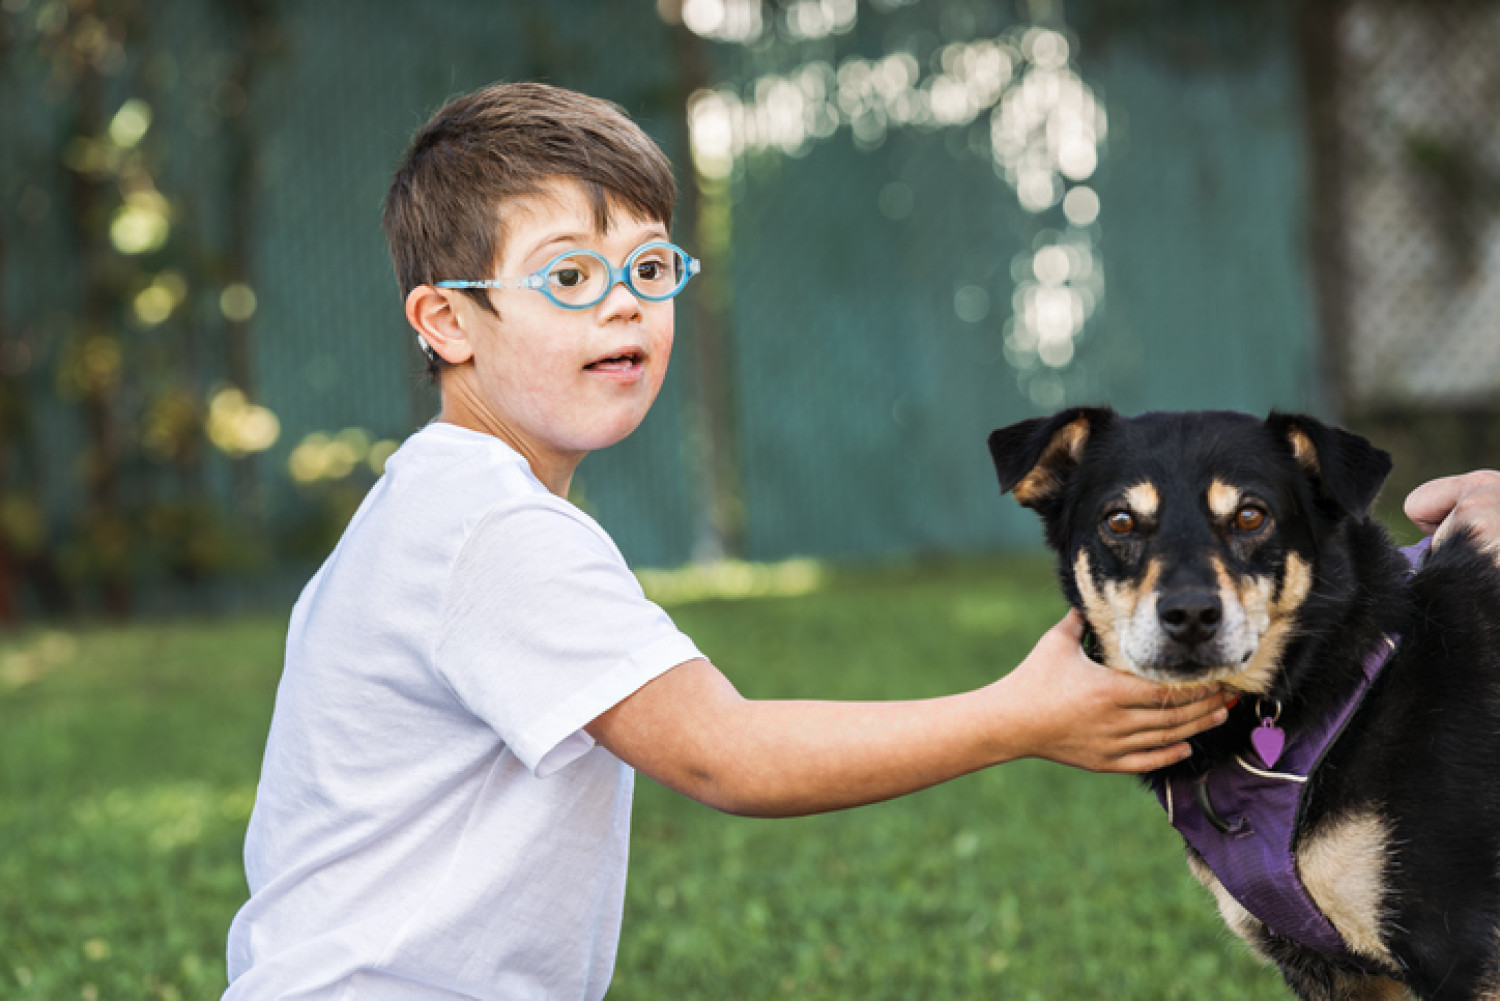 Young boy with downsyndrome glasses petting a black dog in a backyard setting.